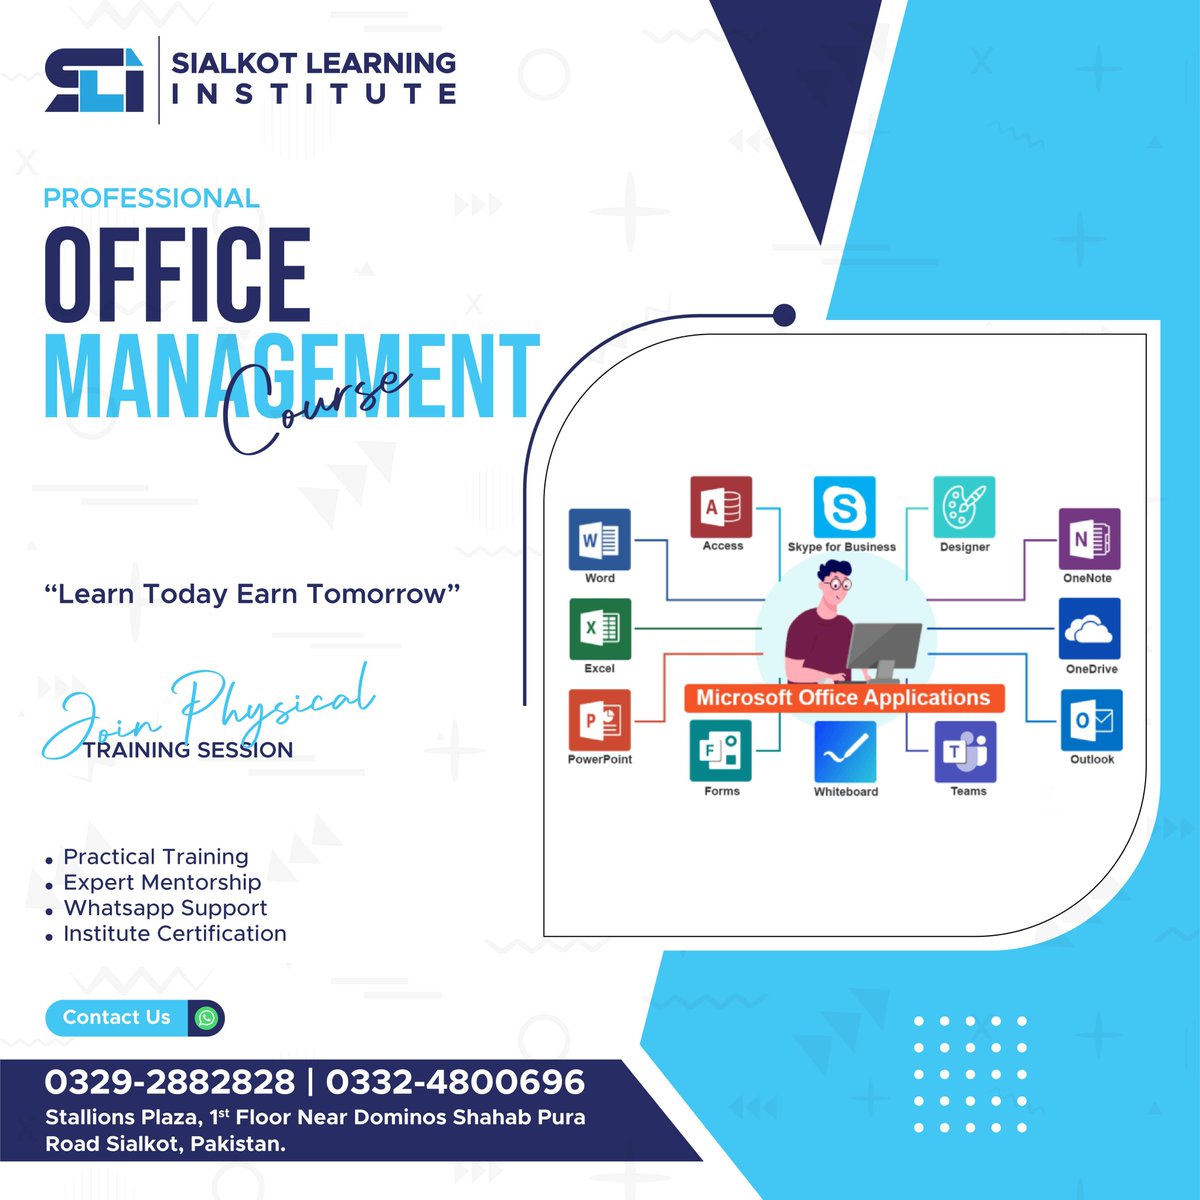 Did you know that 77% of job openings require proficiency in Microsoft Office? 
.
#officemanagment #microsoftWord #microsoftwordtips #microsoftwordtutorial #microsoftexceltips #microsoftexceltutorial #microsoftexcelcourse #PowerPoint #Powerpointtips